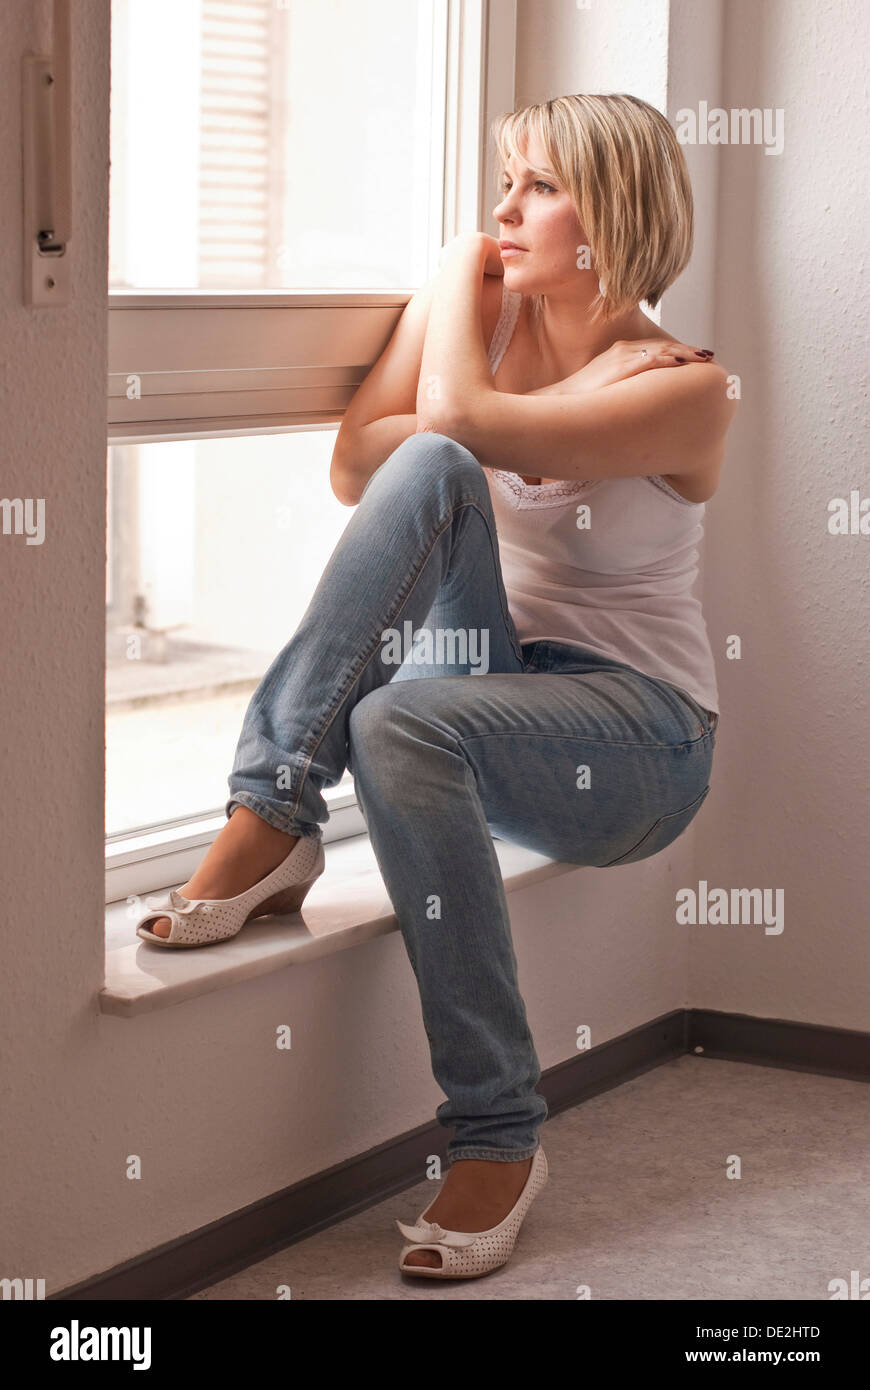 Young woman sitting by a window Stock Photo